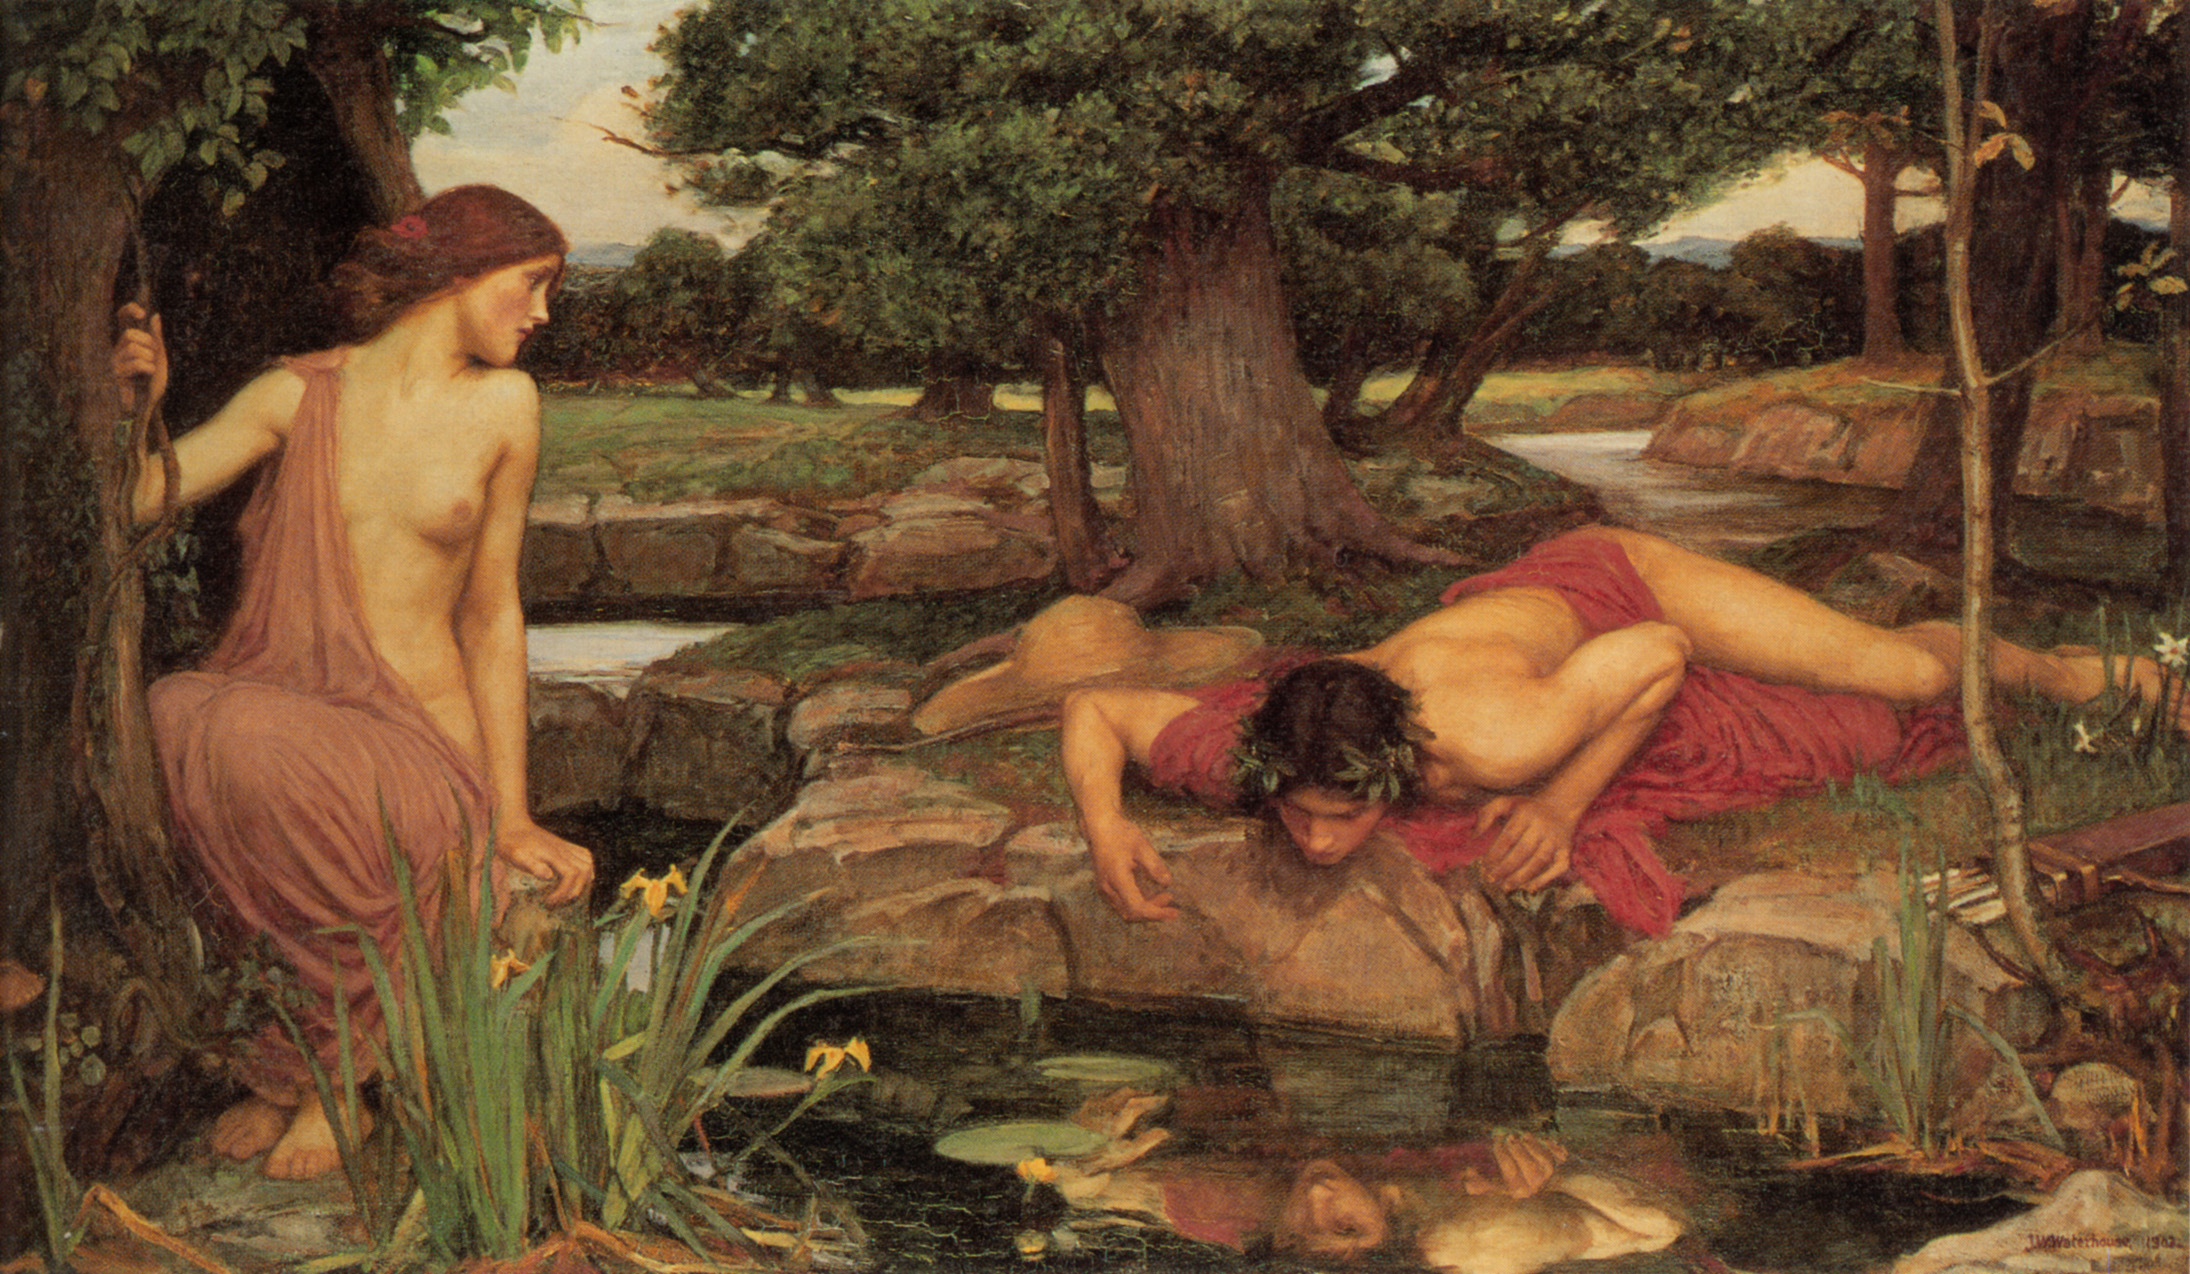 Echo and Narcissus, 1903 by John William Waterhouse